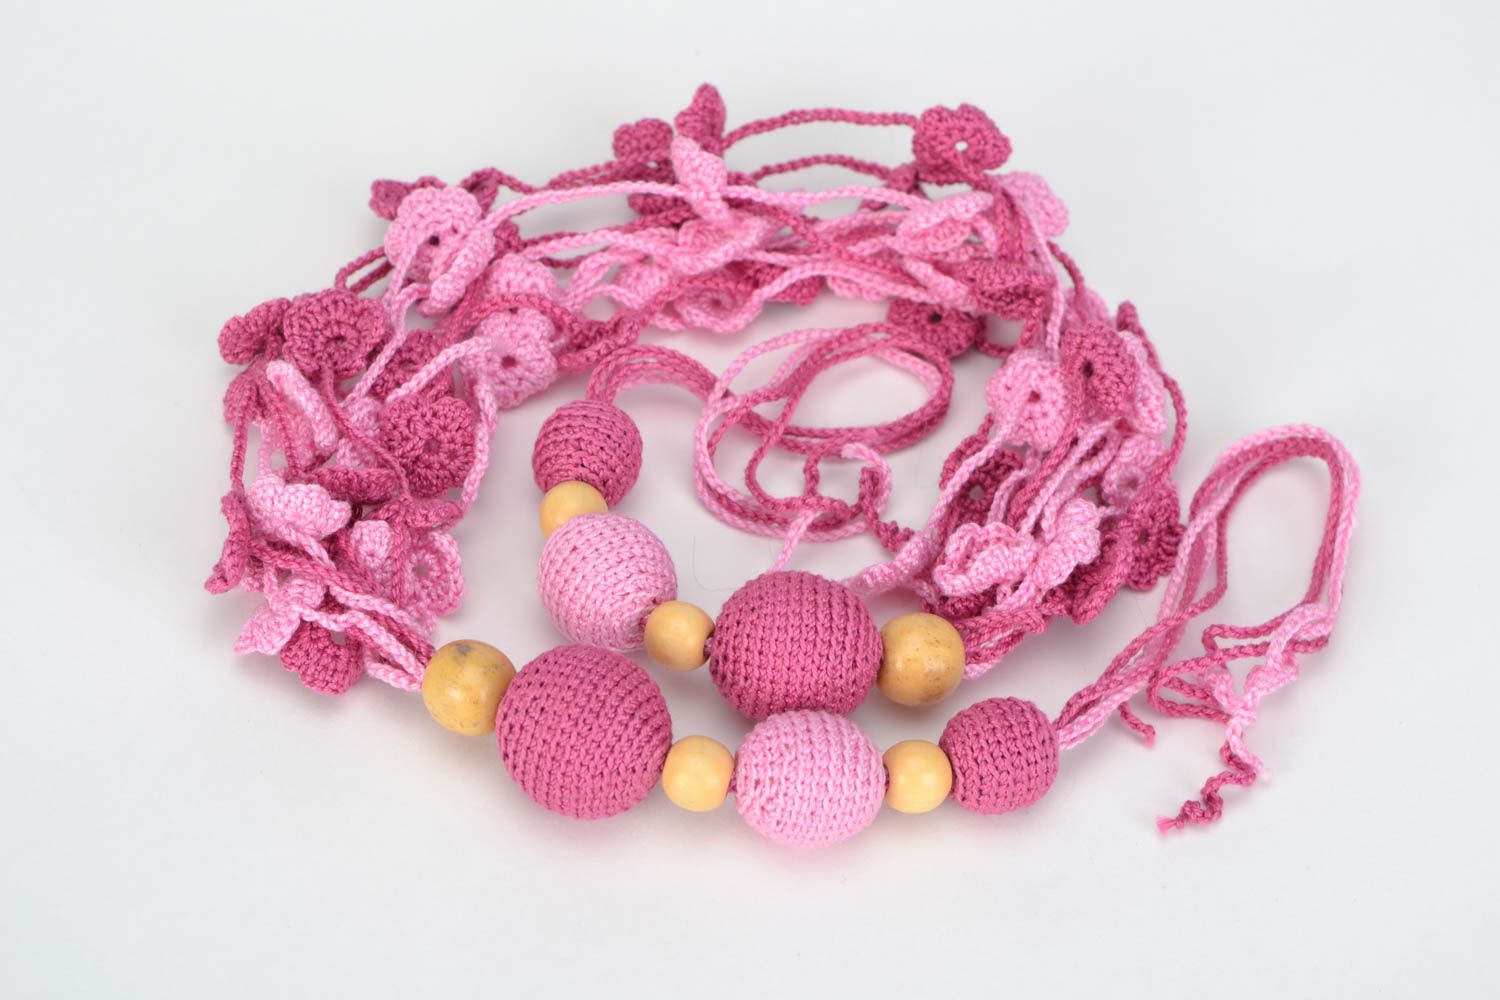 Handmade wooden bead necklace crocheted over with cotton threads of pink color photo 5